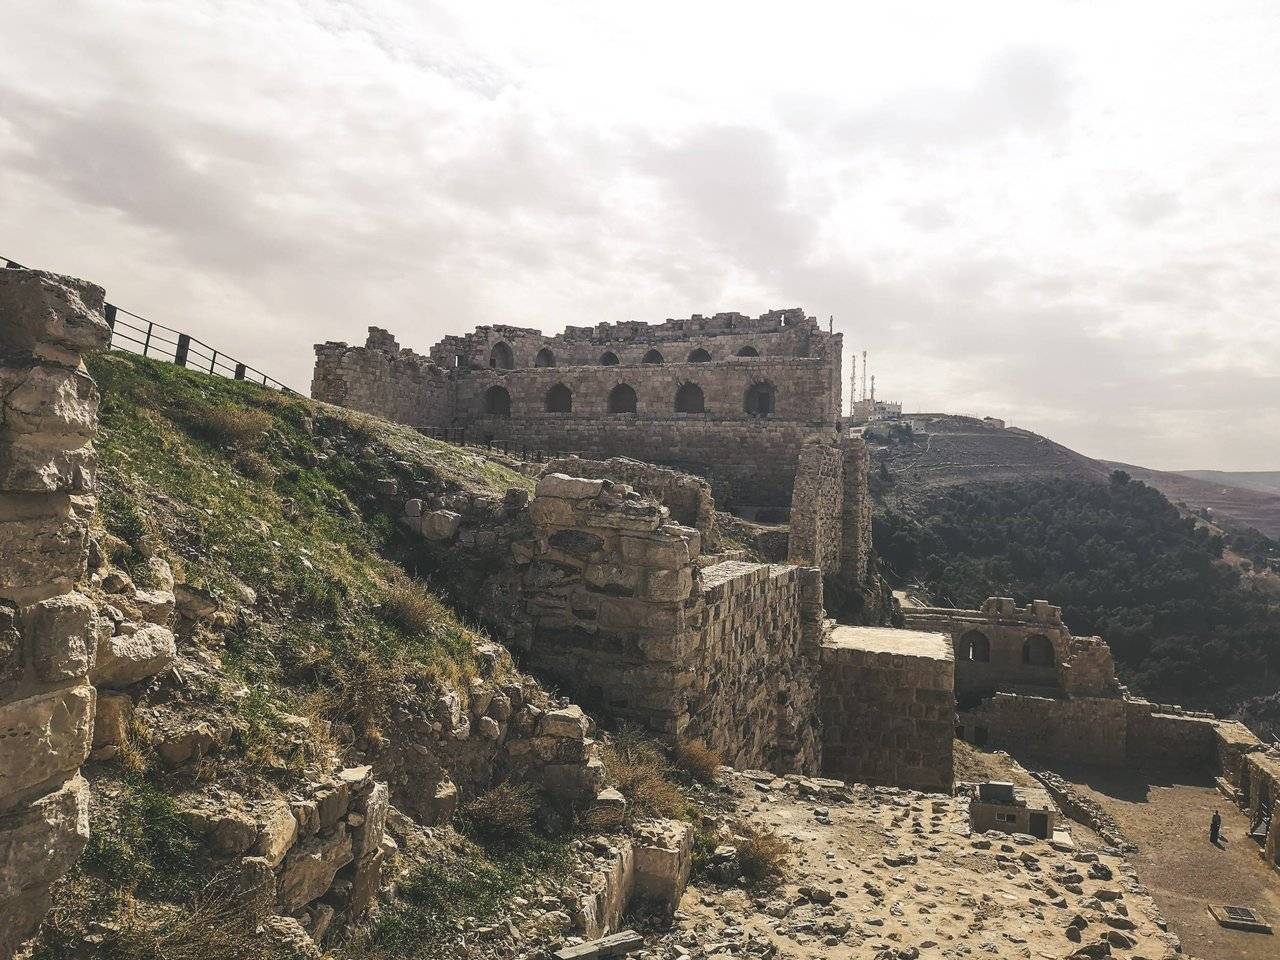   Al-Karak castle was built on the top of Moab Temple. Photo by Alis Monte [CC BY-SA 4.0], via Connecting the Dots